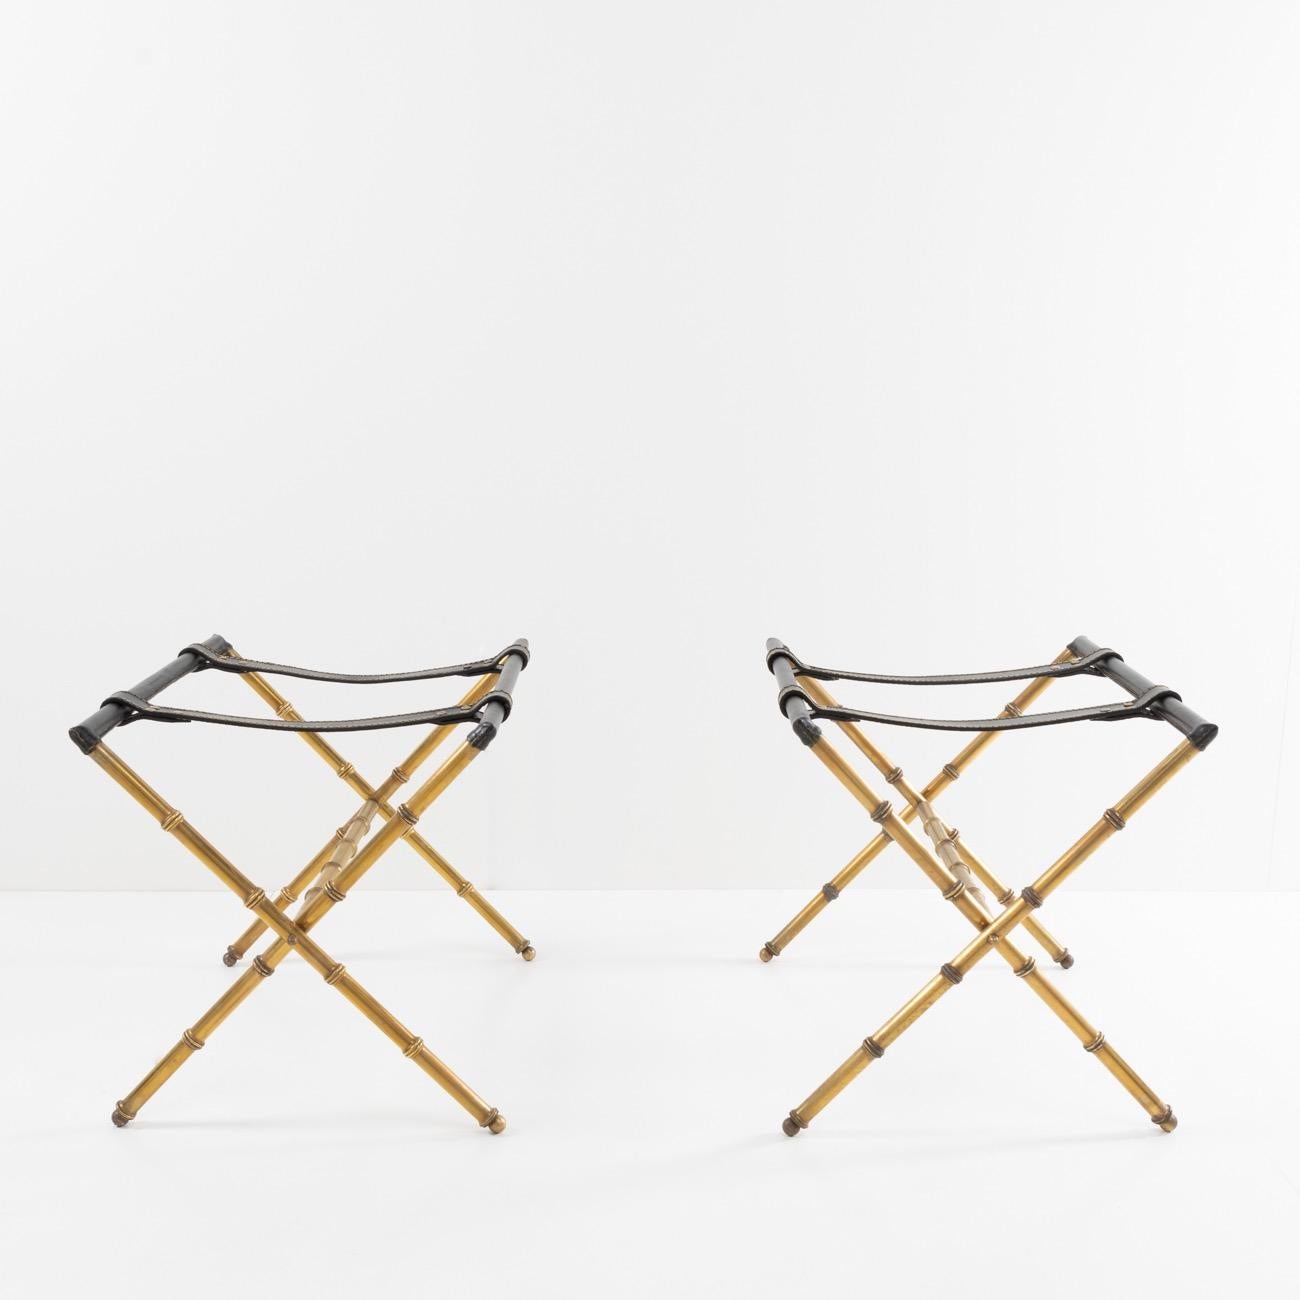 Originally designed by Jacques Adnet to accommodate one or more suitcases, these trestles can also be used as a support for a tray or arranged in pairs as coffee table legs. 
They are entirely made of solid copper, (Jacques Adnet and the Compagnie